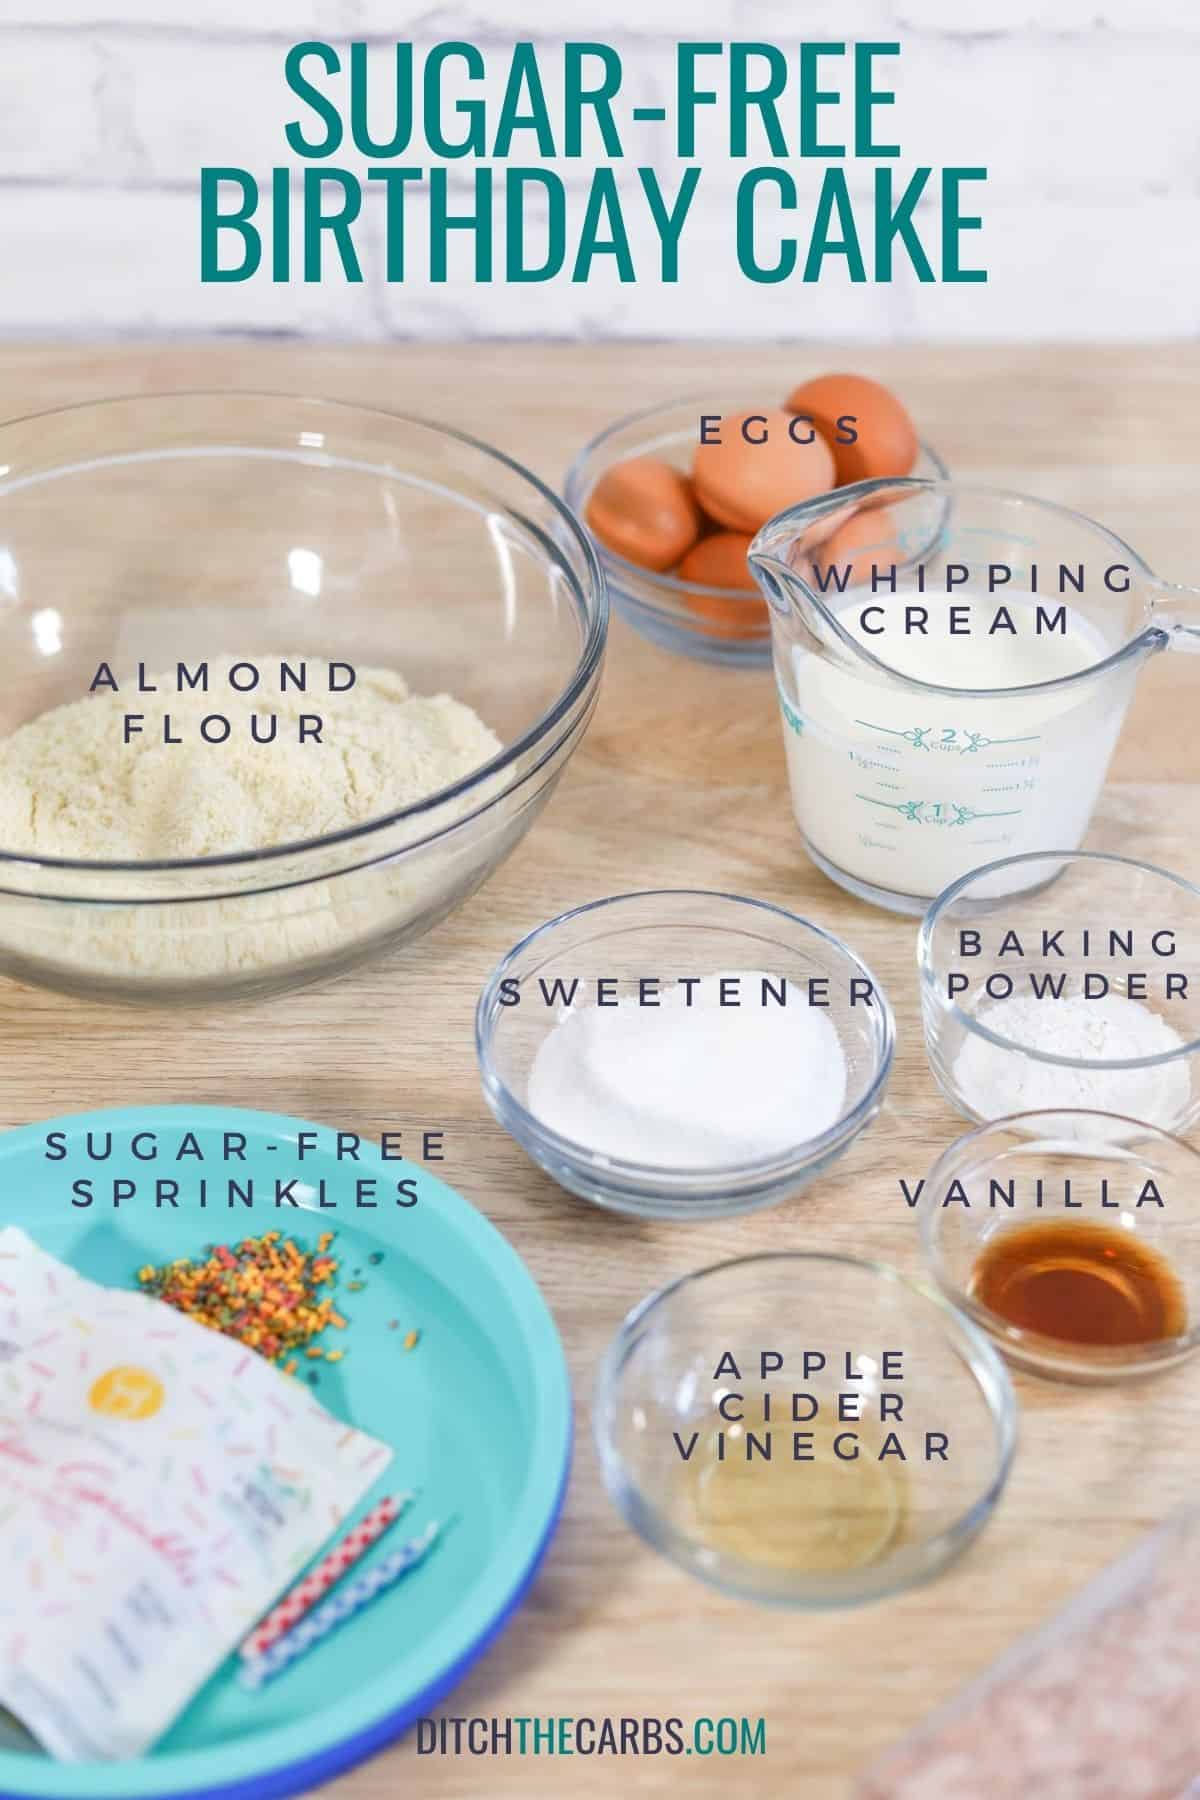 Ingredients needed to make sugar-free birthday cake measured and in bowls on the counter.